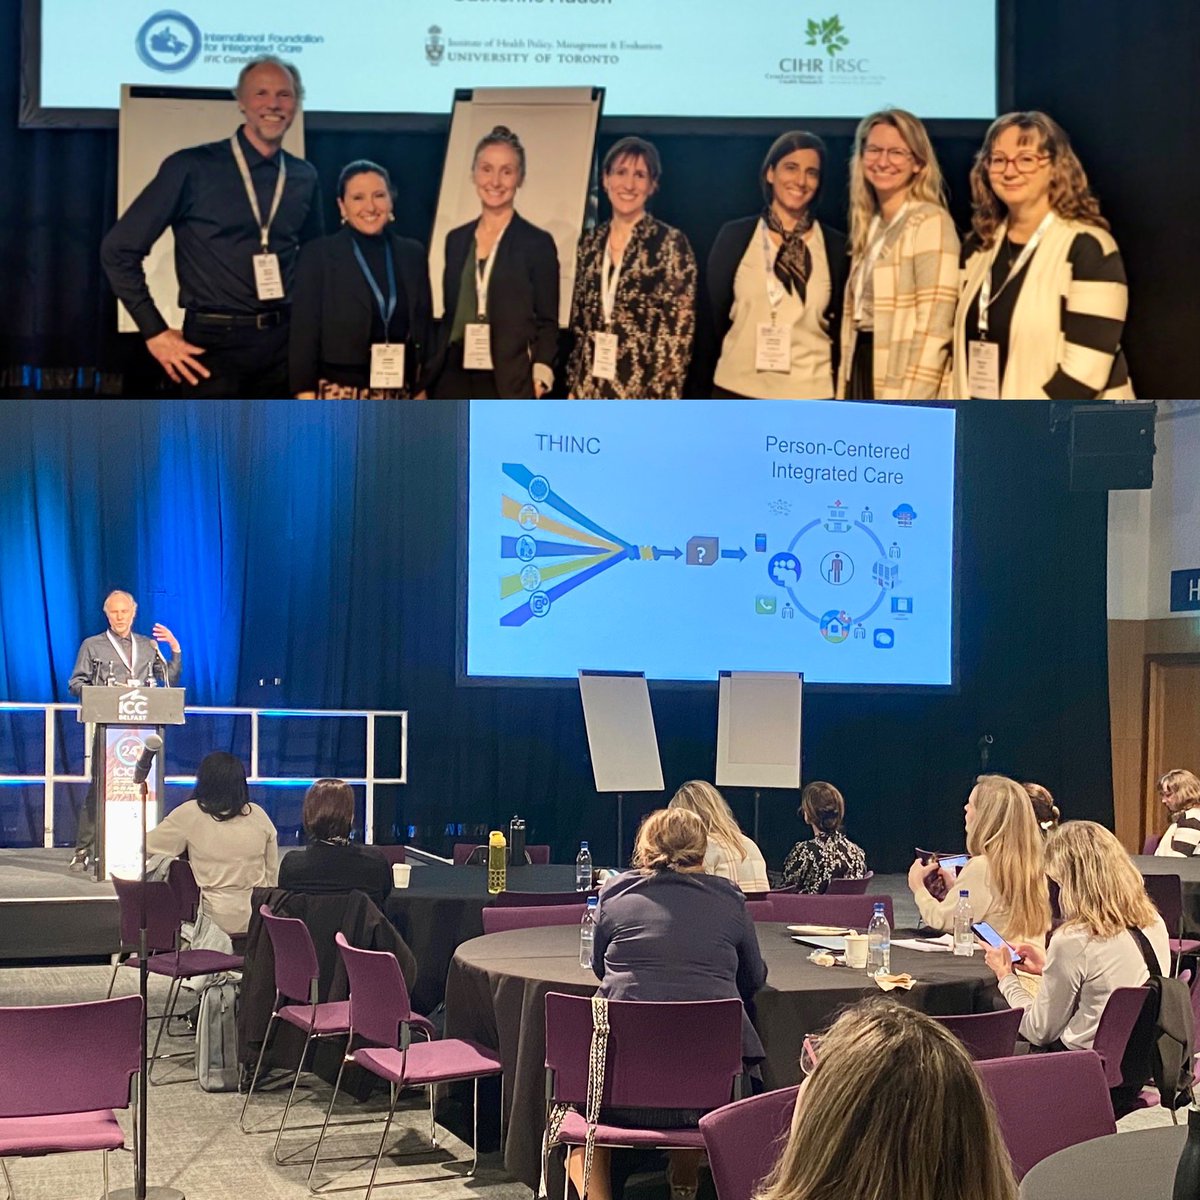 Fantastic workshop with @CIHR_IRSC #THINC #integratedcare KM & Impact Hub & teams @ #ICIC24 to engage, connect & discuss #collectiveimpact towards evidence-informed integrated care transformation. @JodemeGoldhar @wwodchis @ihspr_isps_cihr @IFICInfo @LorraineLipsc17 @drkokrainec